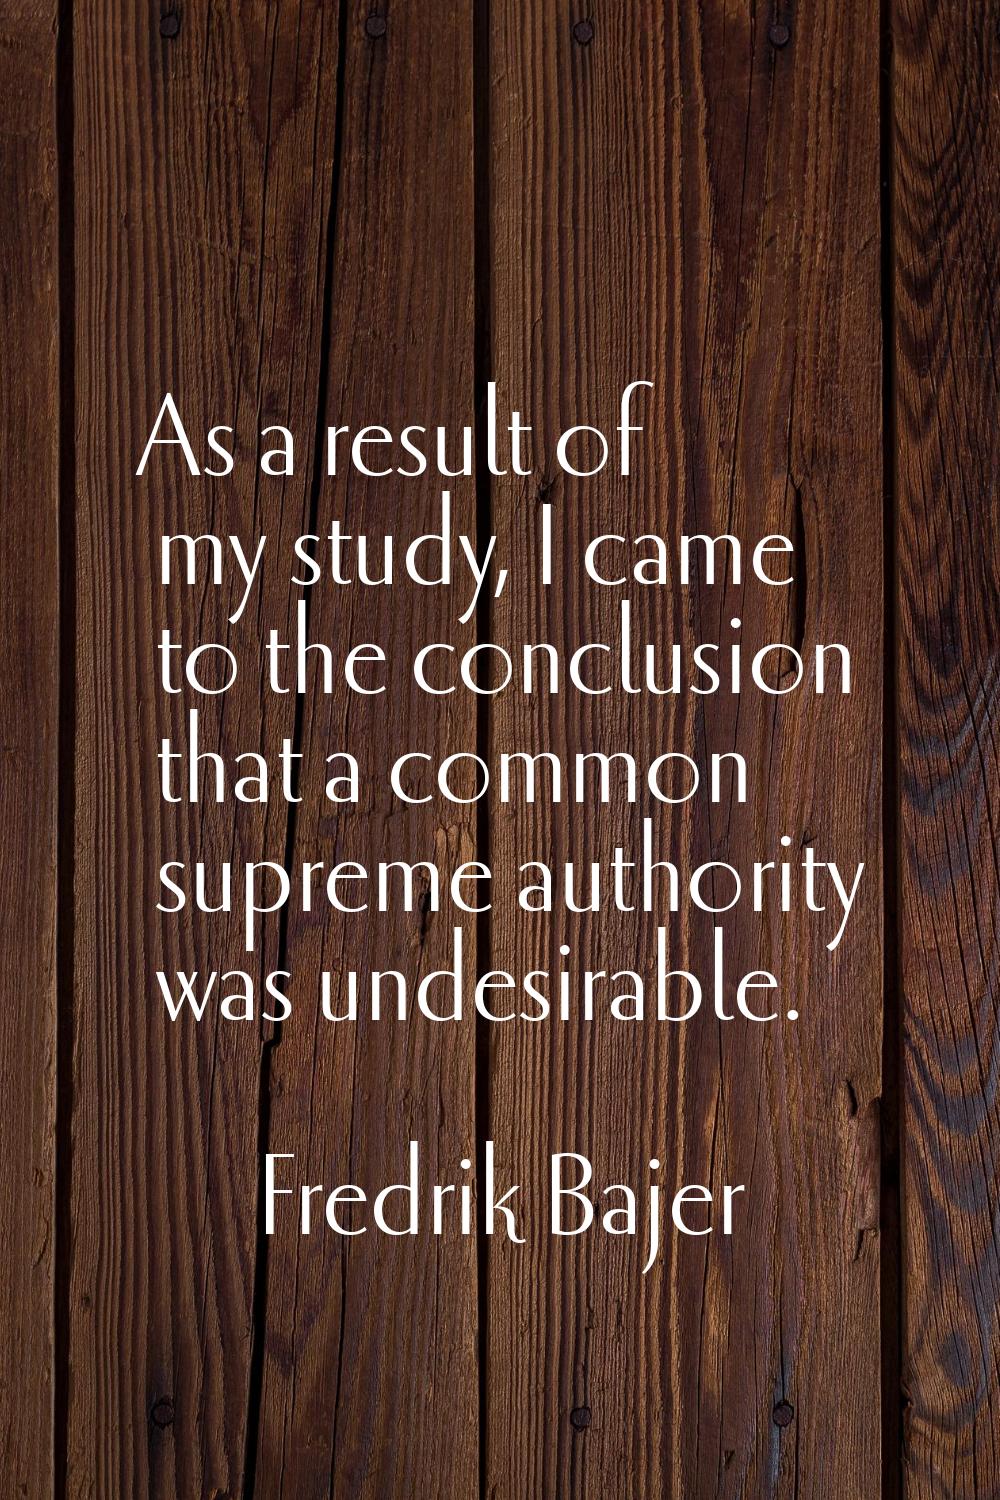 As a result of my study, I came to the conclusion that a common supreme authority was undesirable.